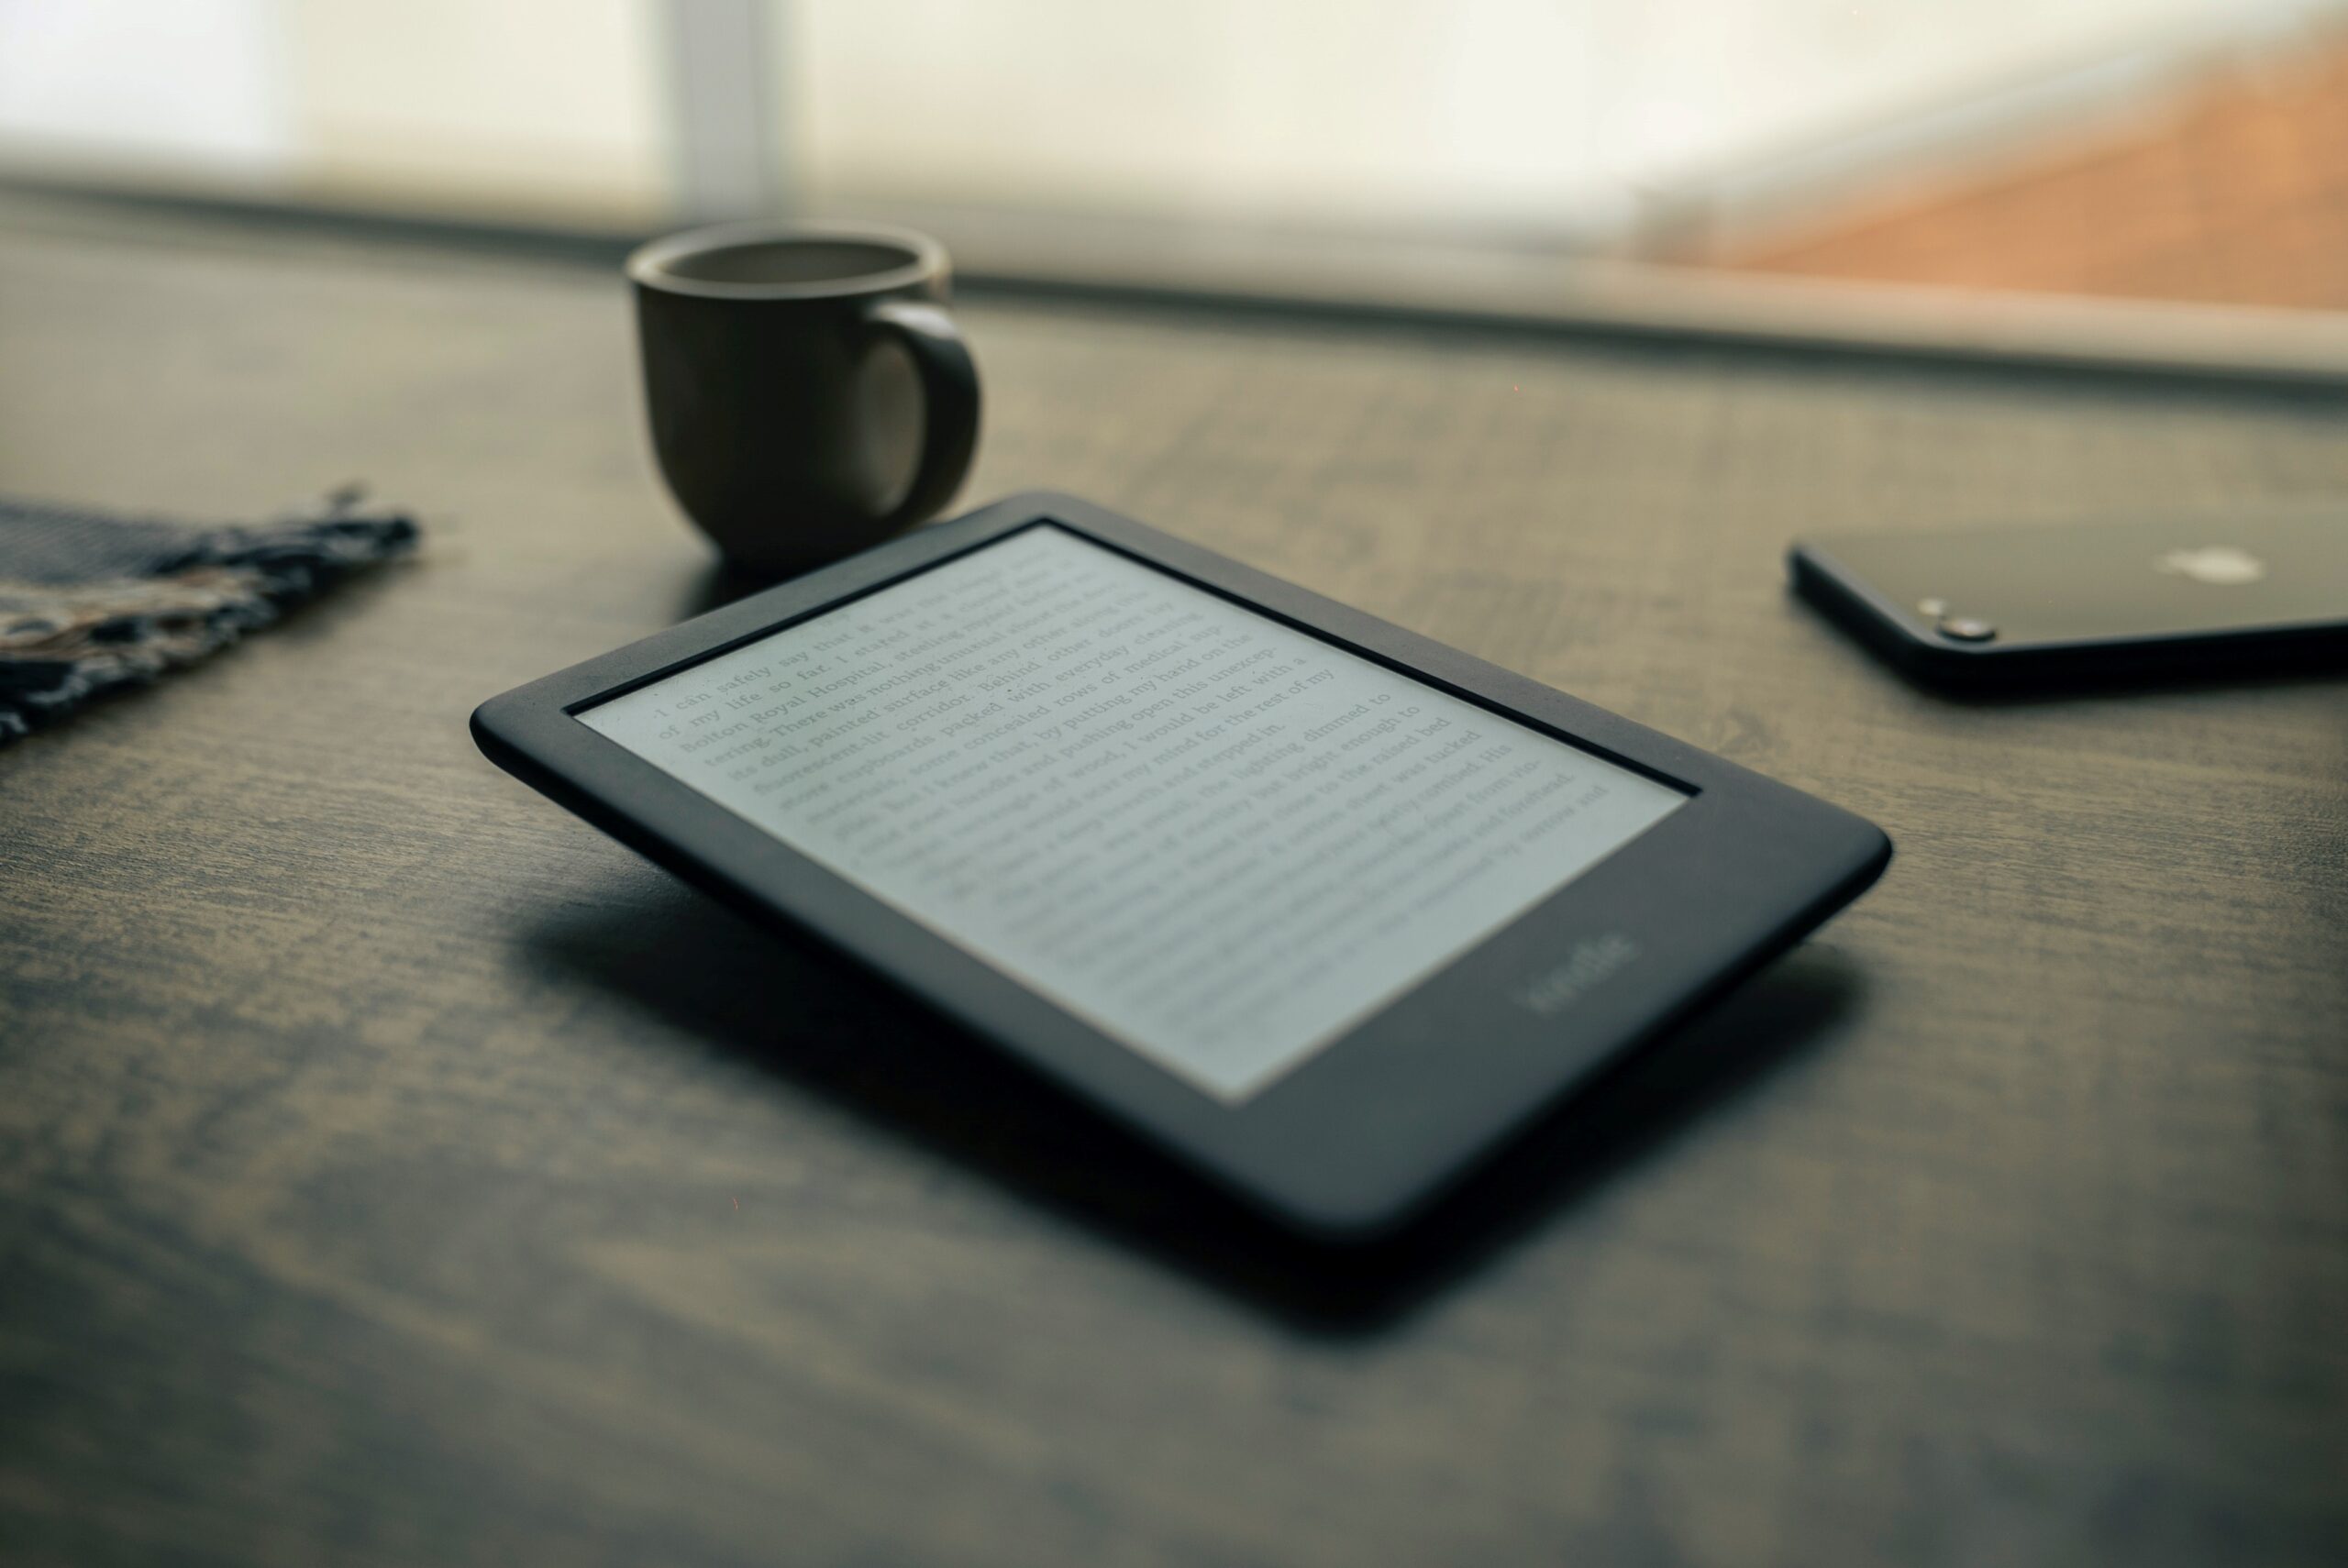 Stock image of an E-Reader and coffee cup